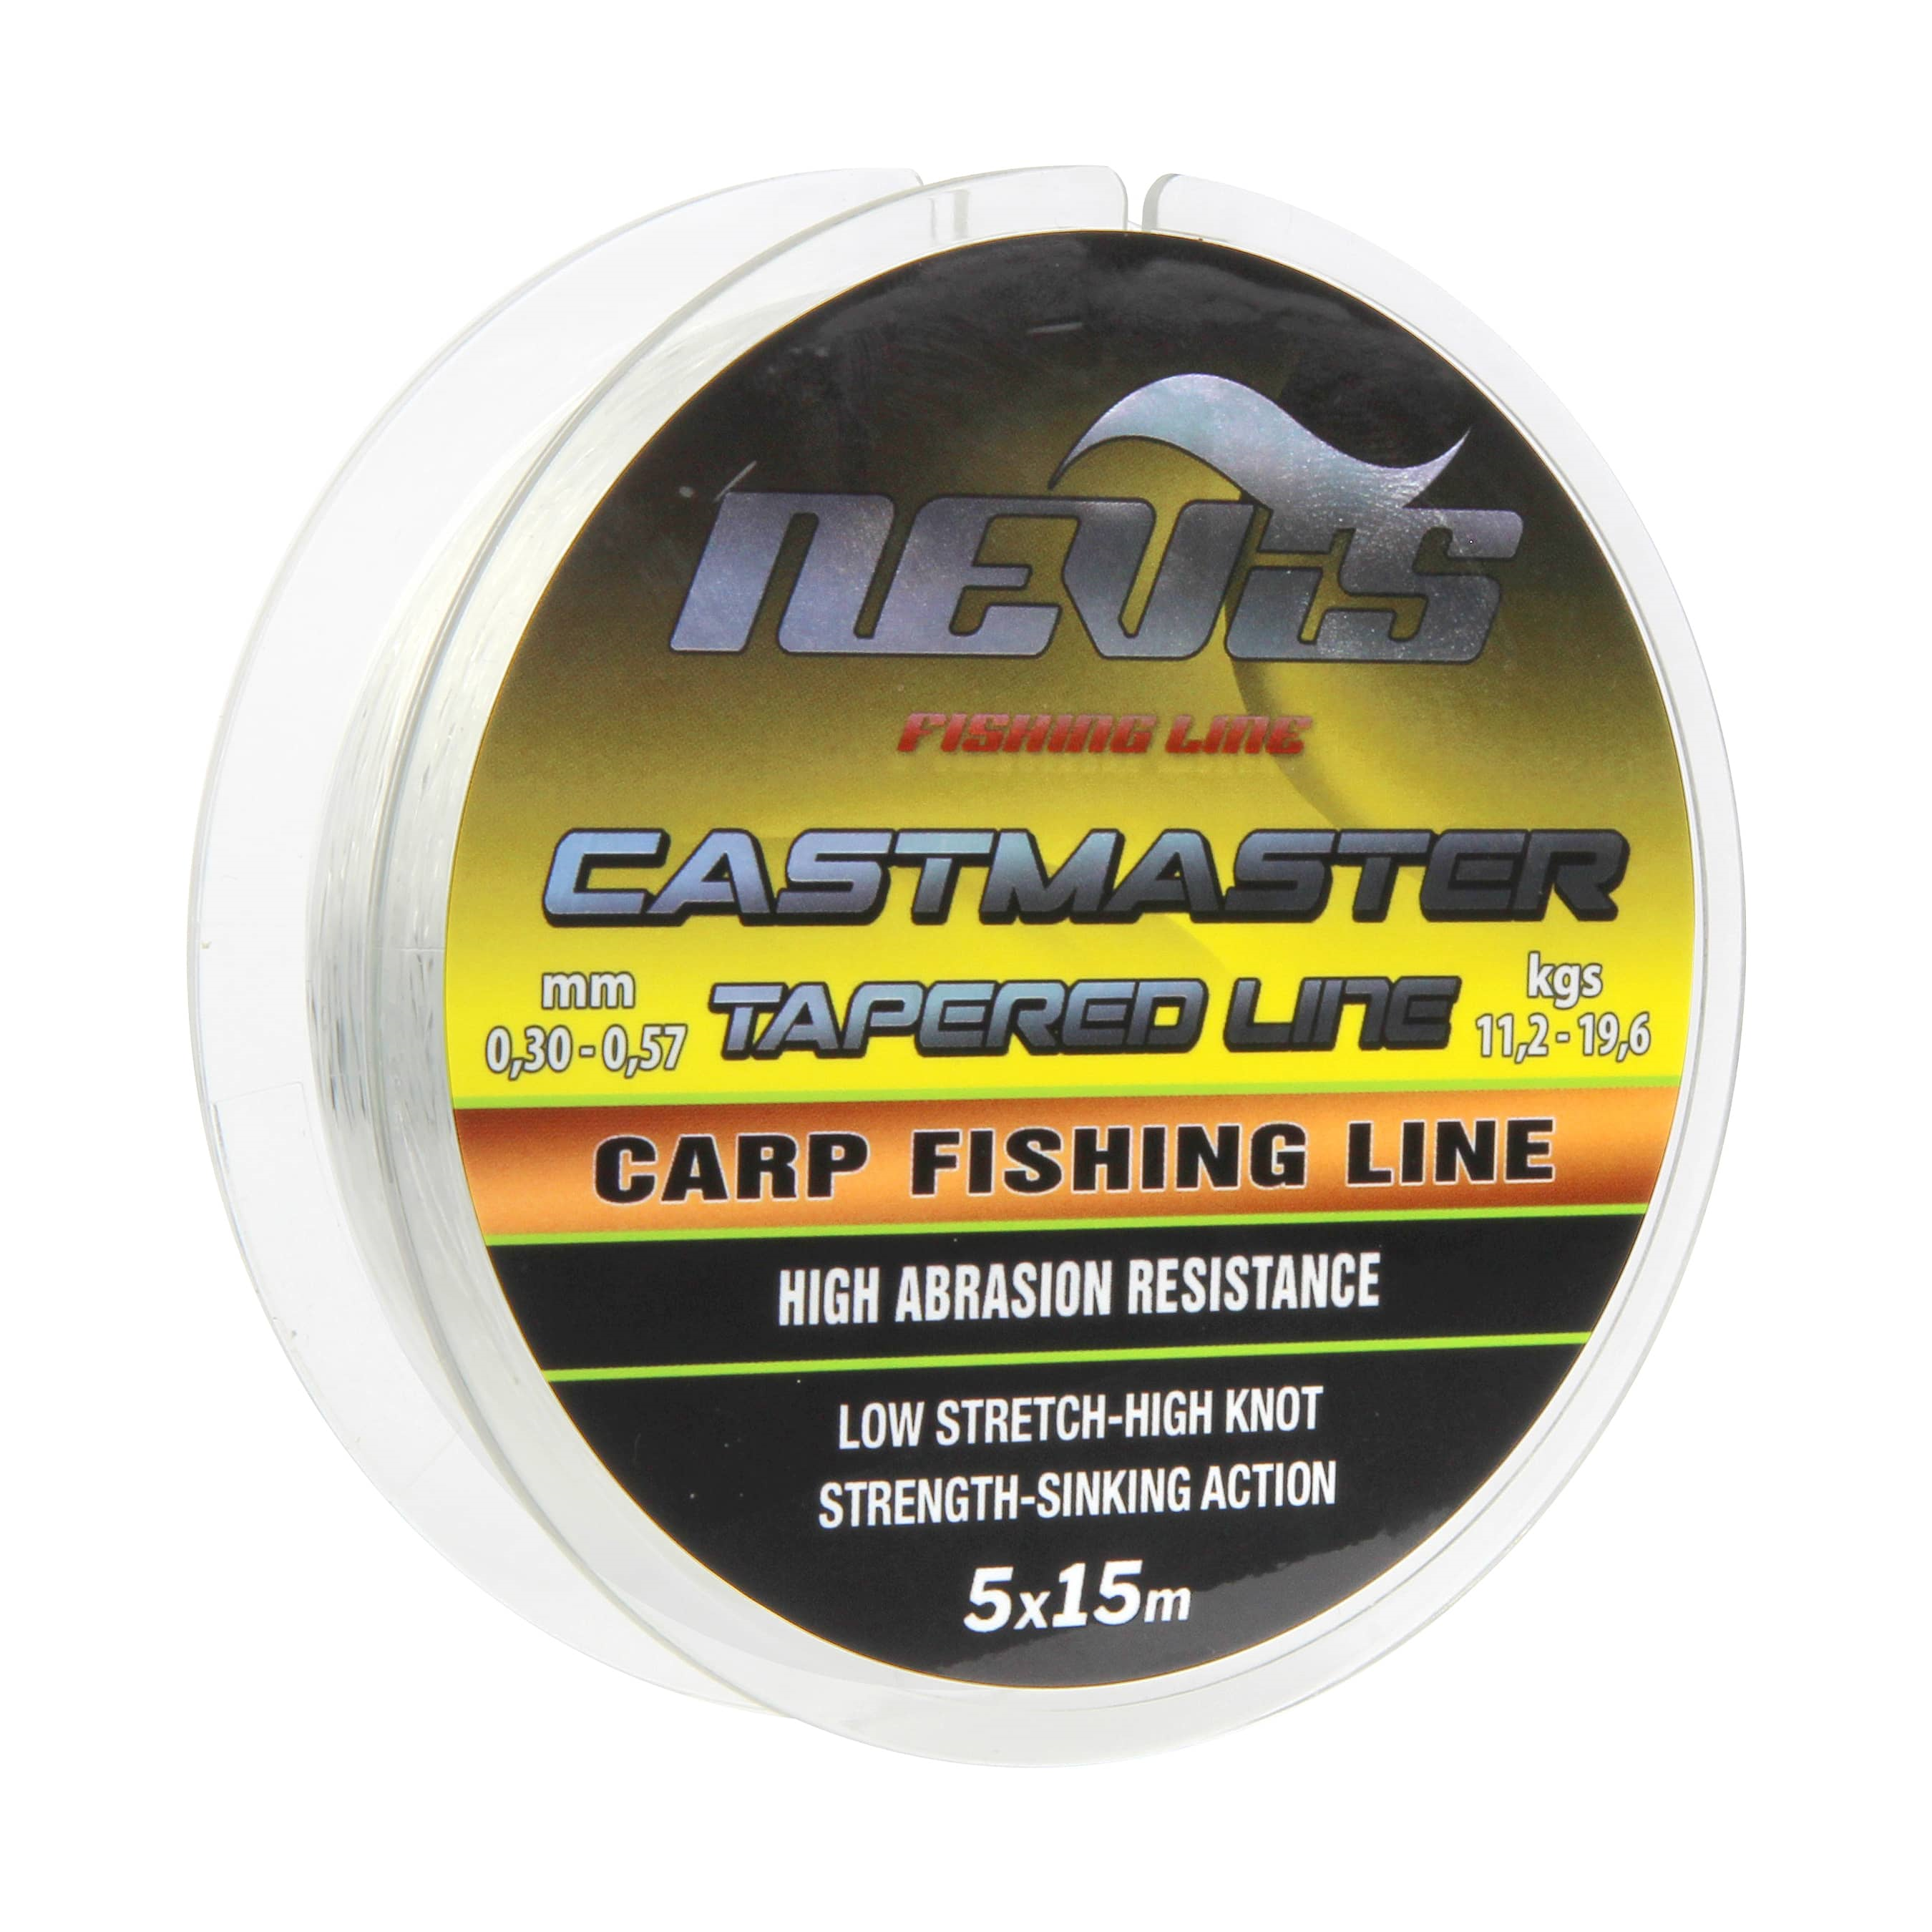 NEVIS CASTMASTER TAPERED LINE 5 X15M 0,23-0,57 MM